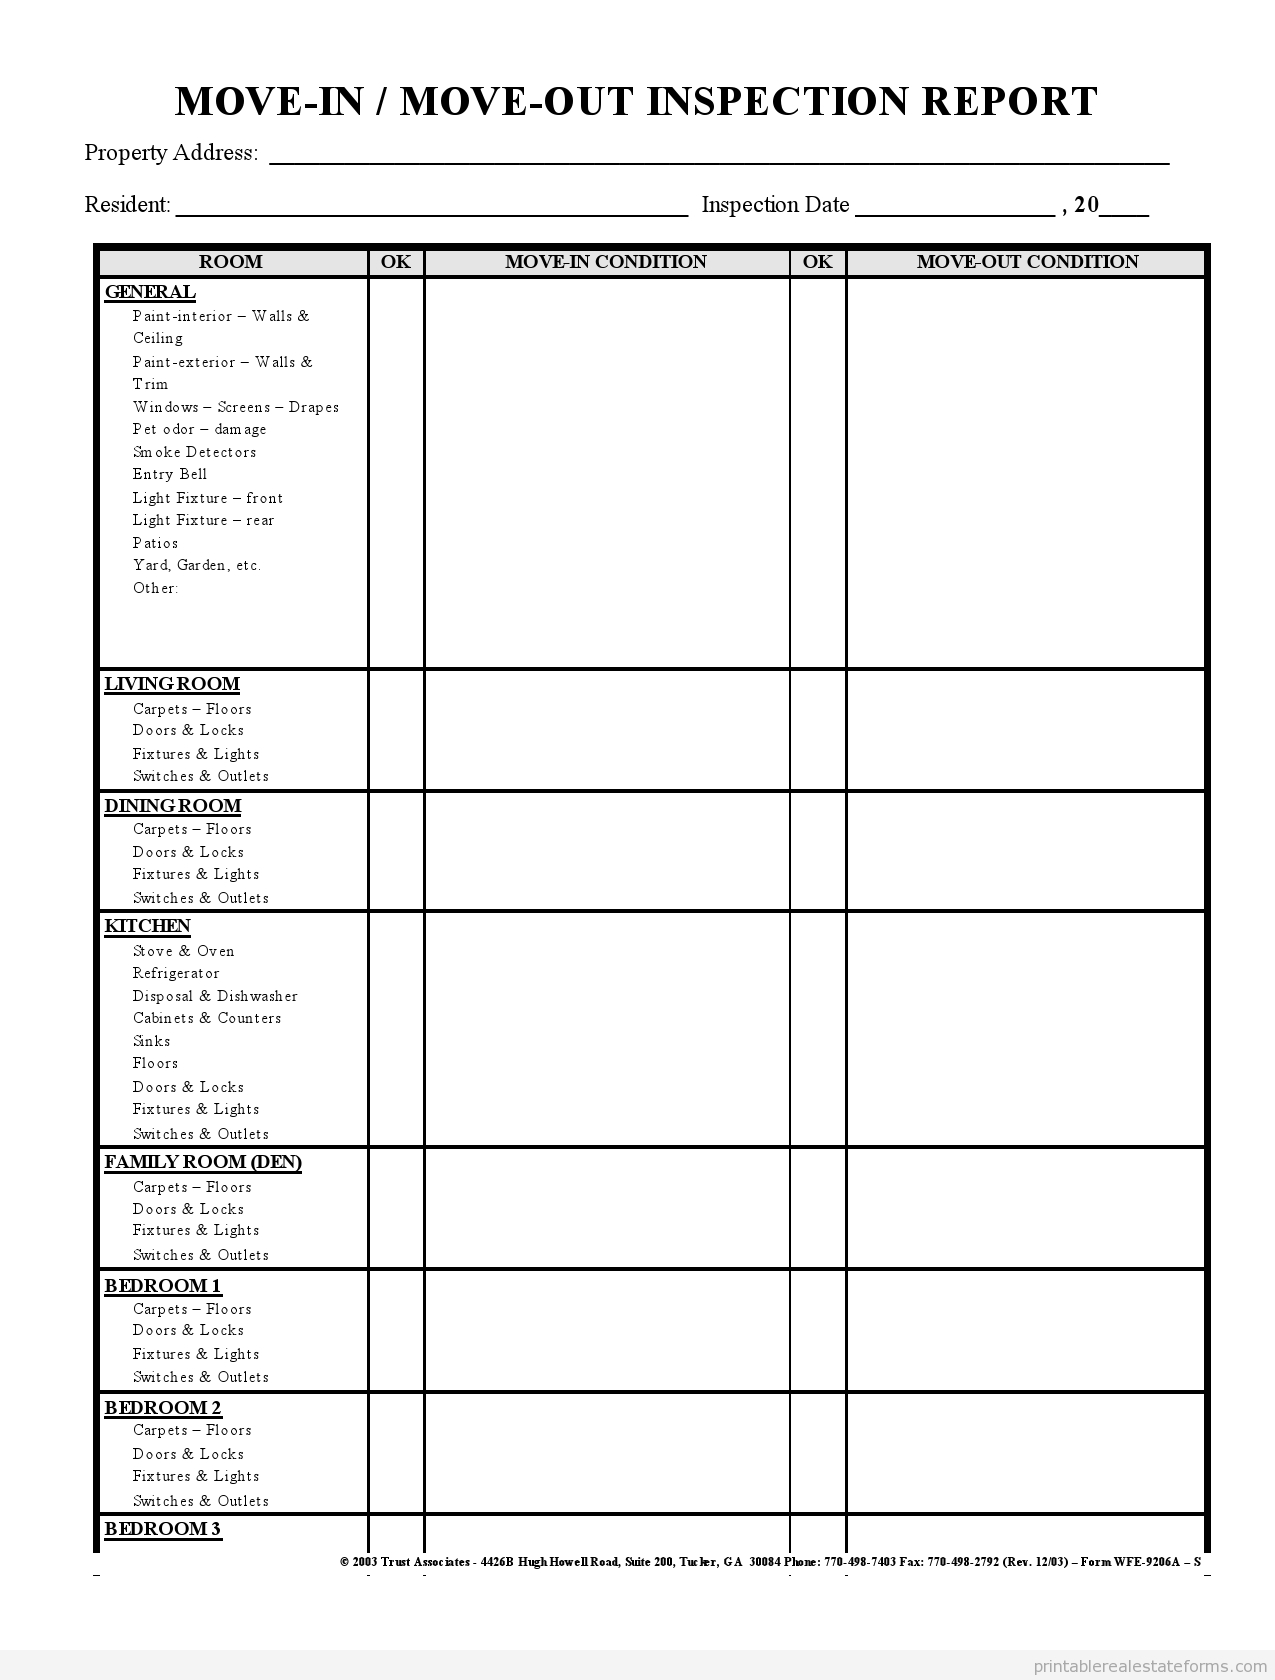 Sample Printable Move In Move Out Inspection Report Form Inside Property Management Inspection Report Template